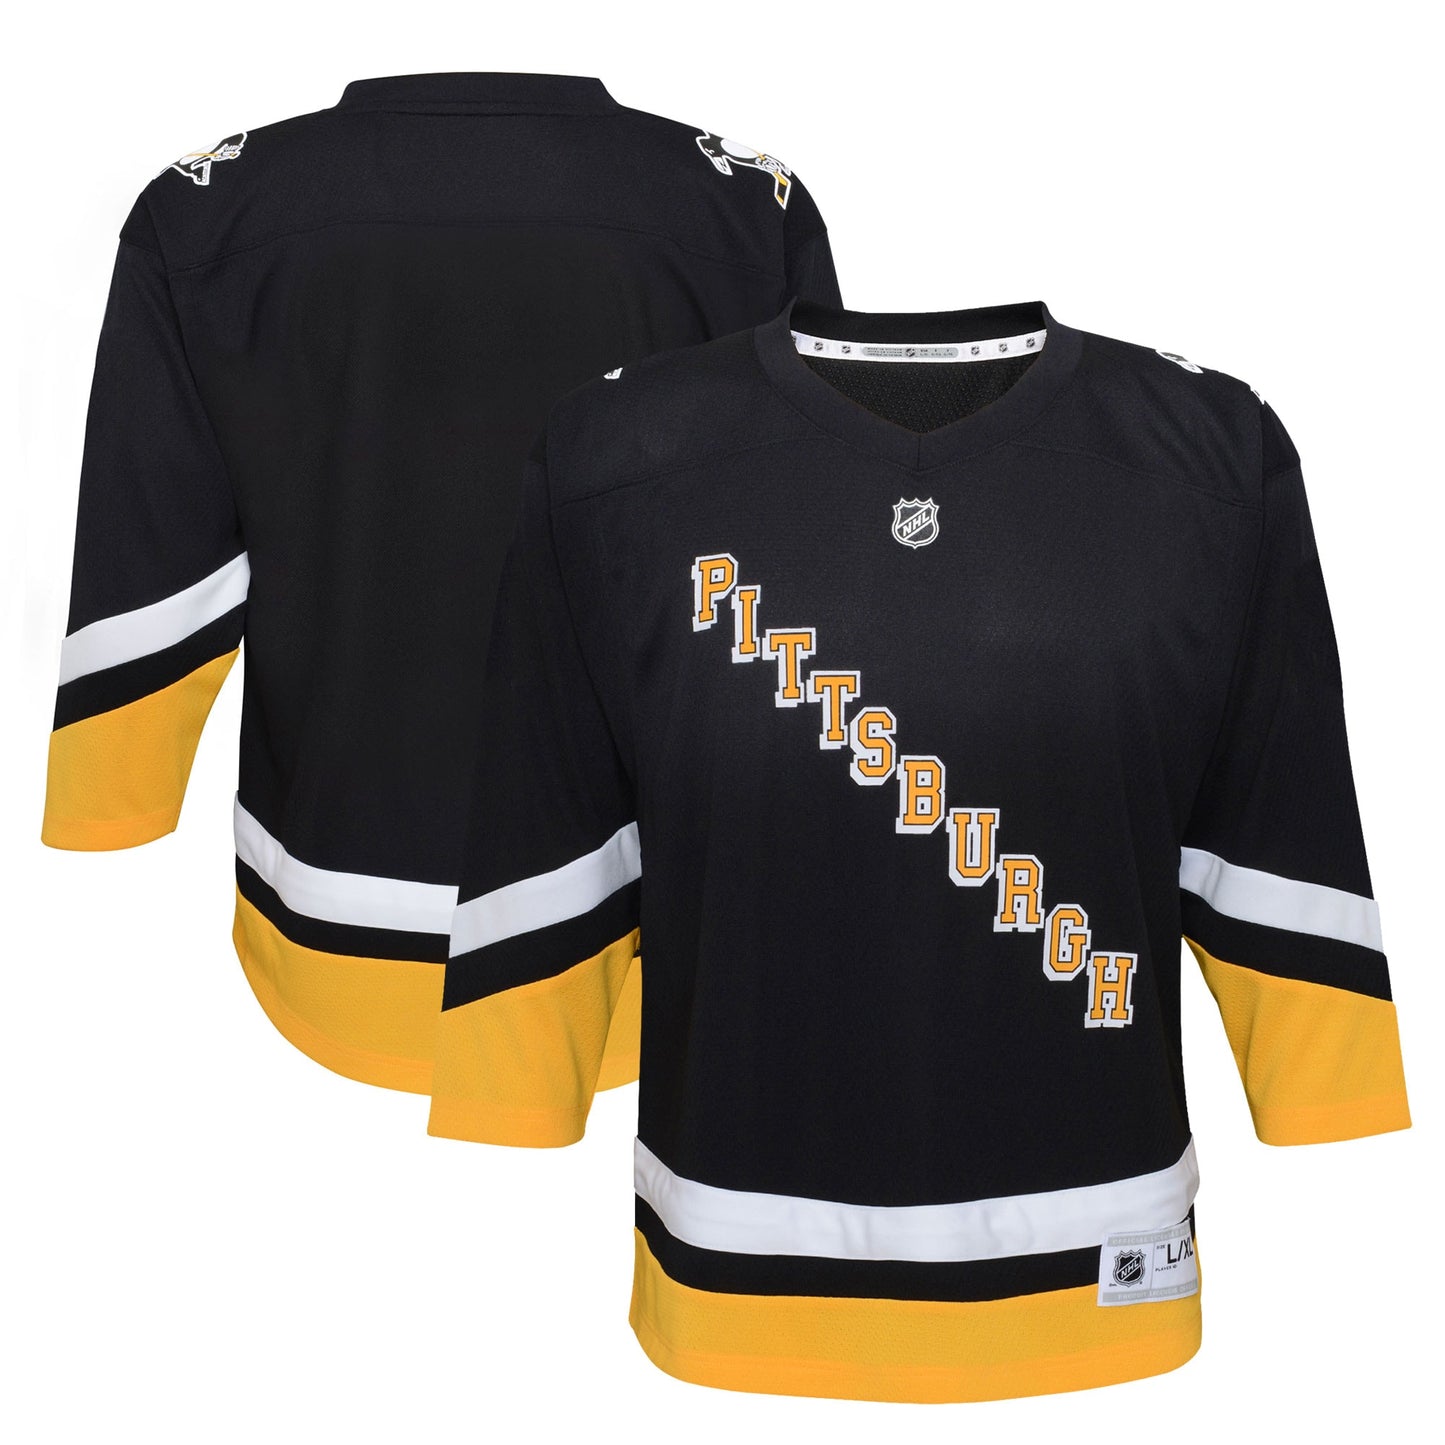 Pittsburgh Penguins Youth 2021/22 Alternate Replica Jersey - Black